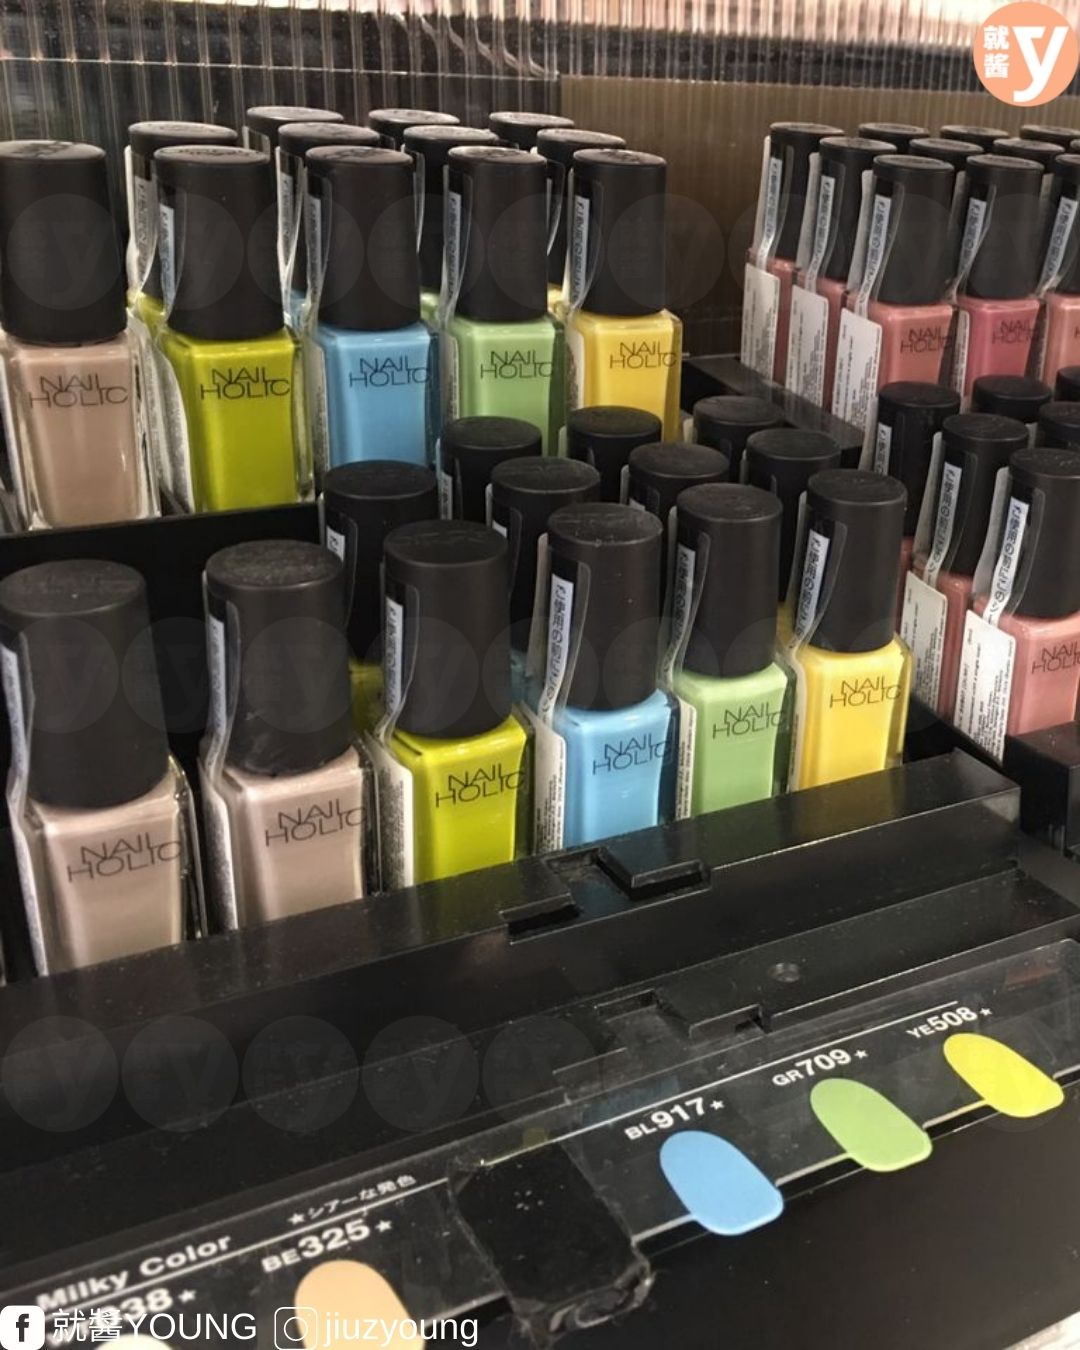 ainz-and-tulpe-opens-first-store-in-pavilion-bukit-jalil-nail-polish